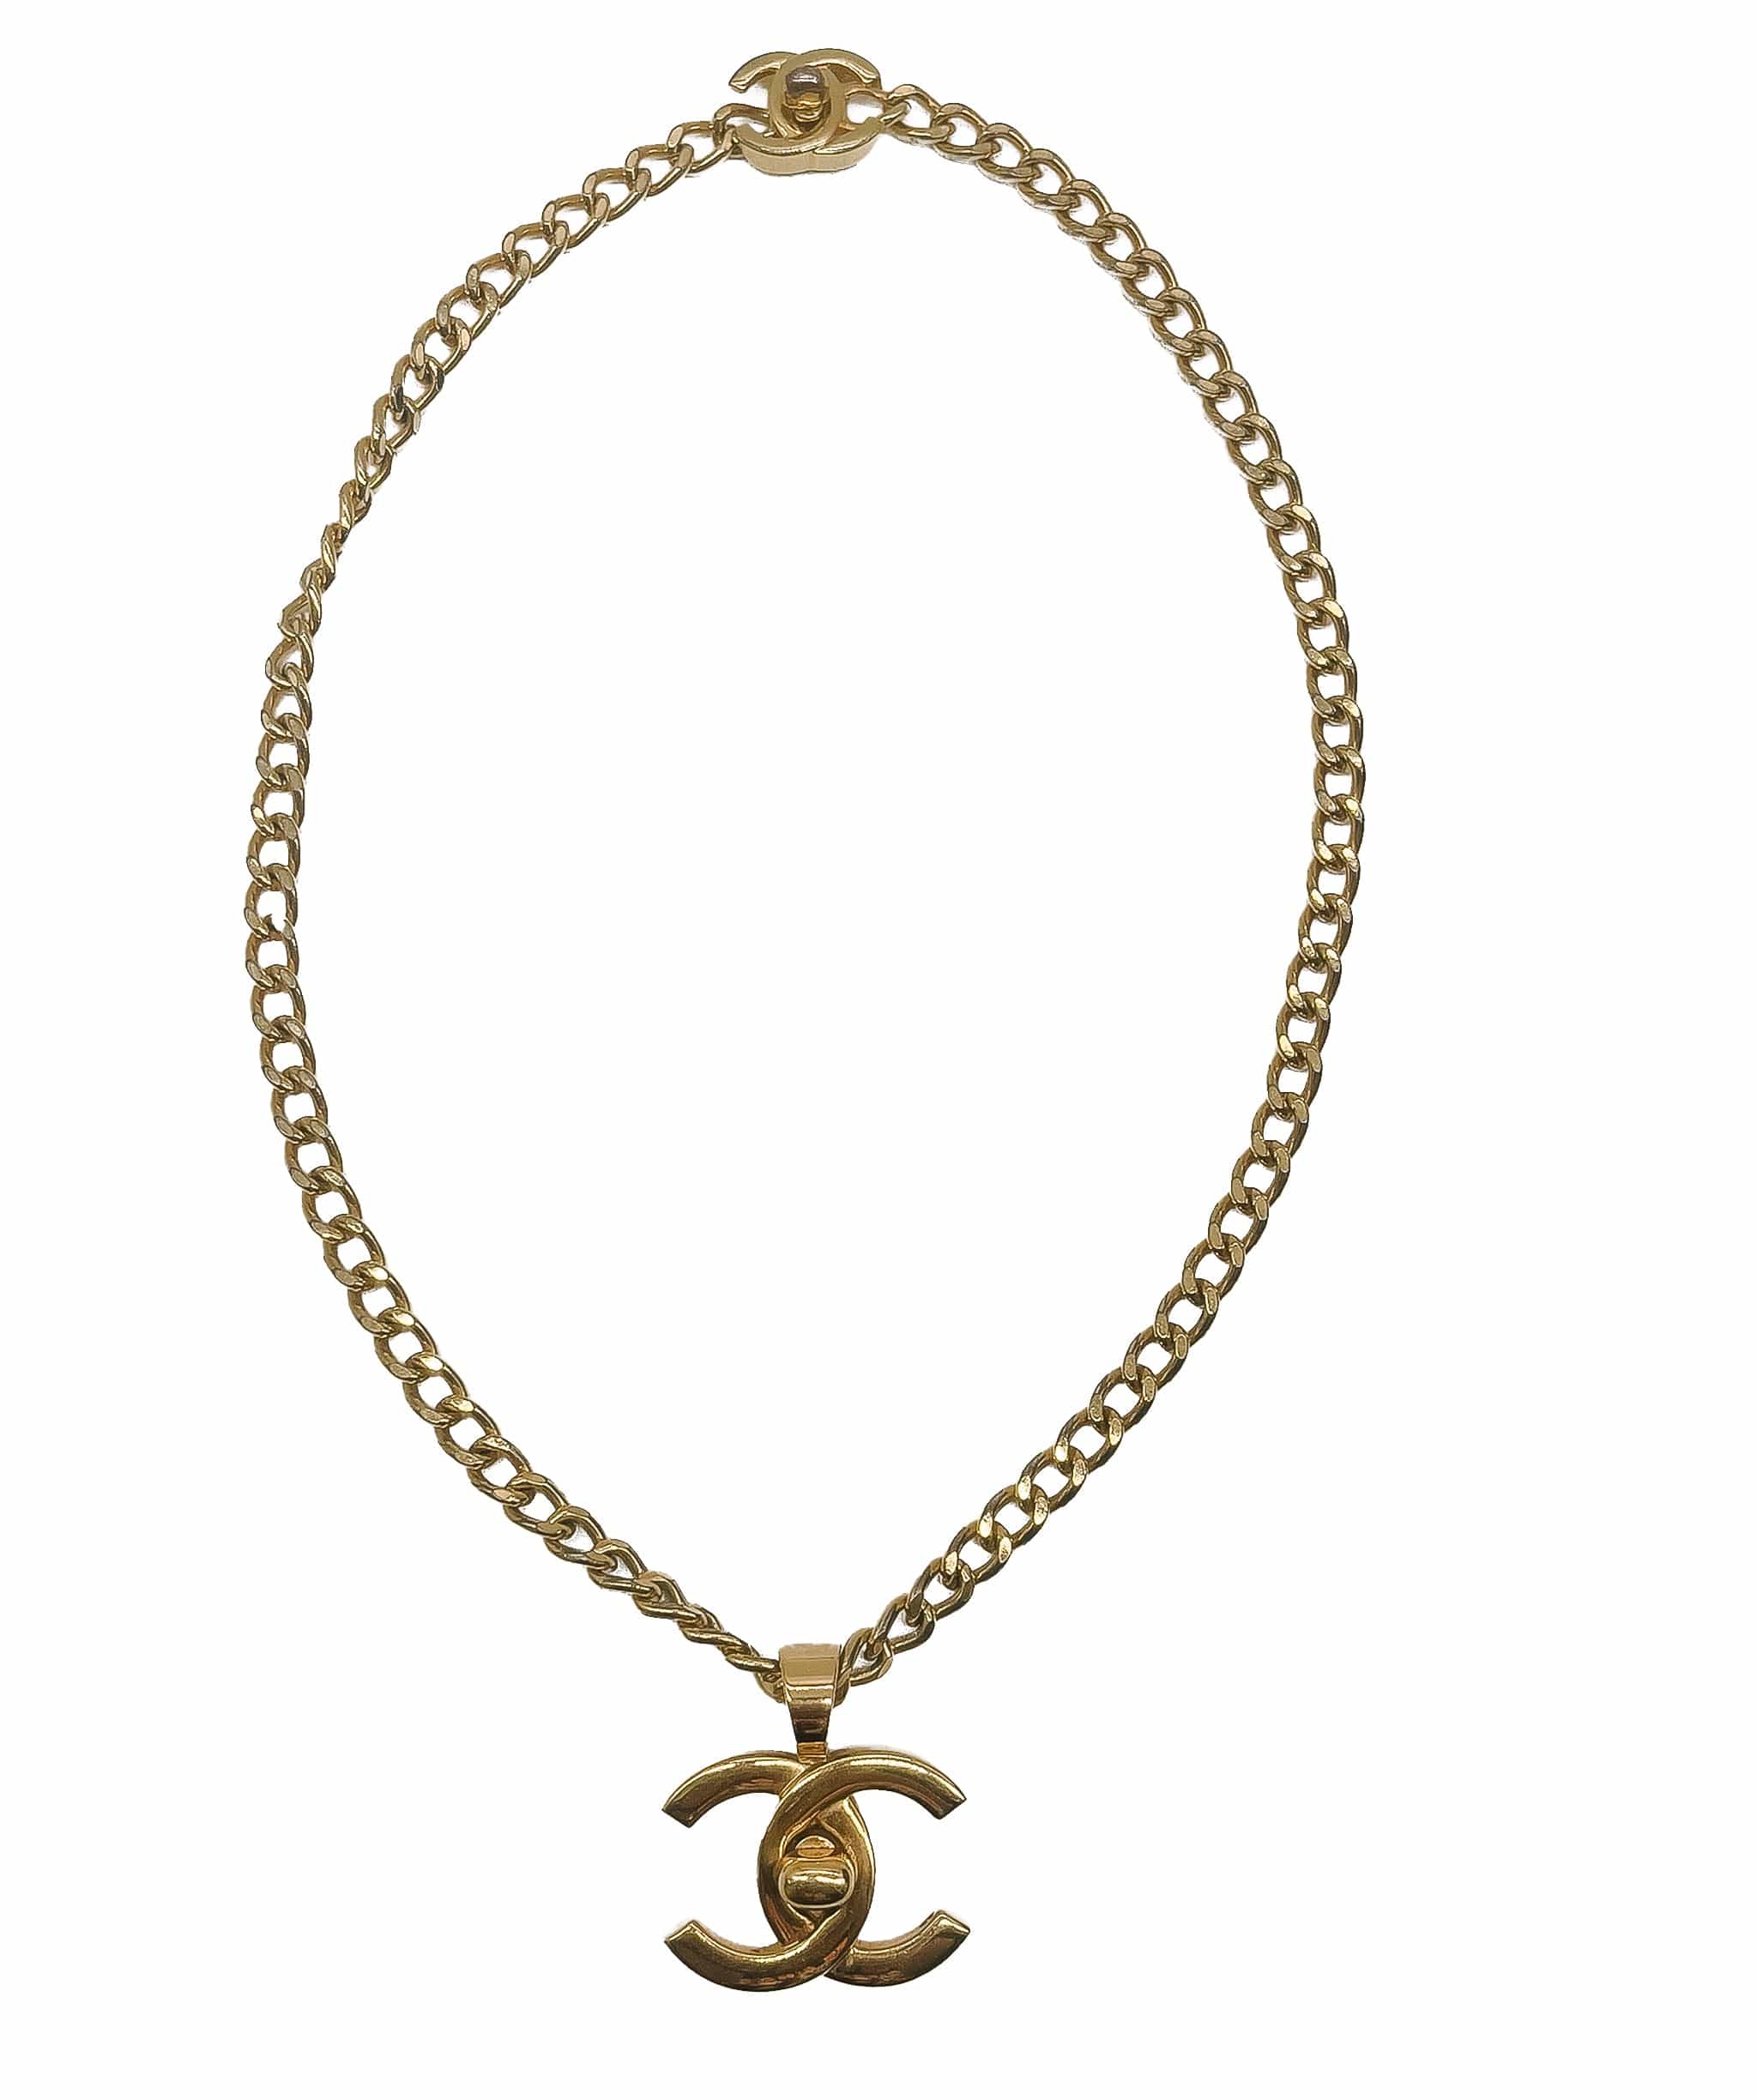 Chanel Turnlock Necklace ASL10207